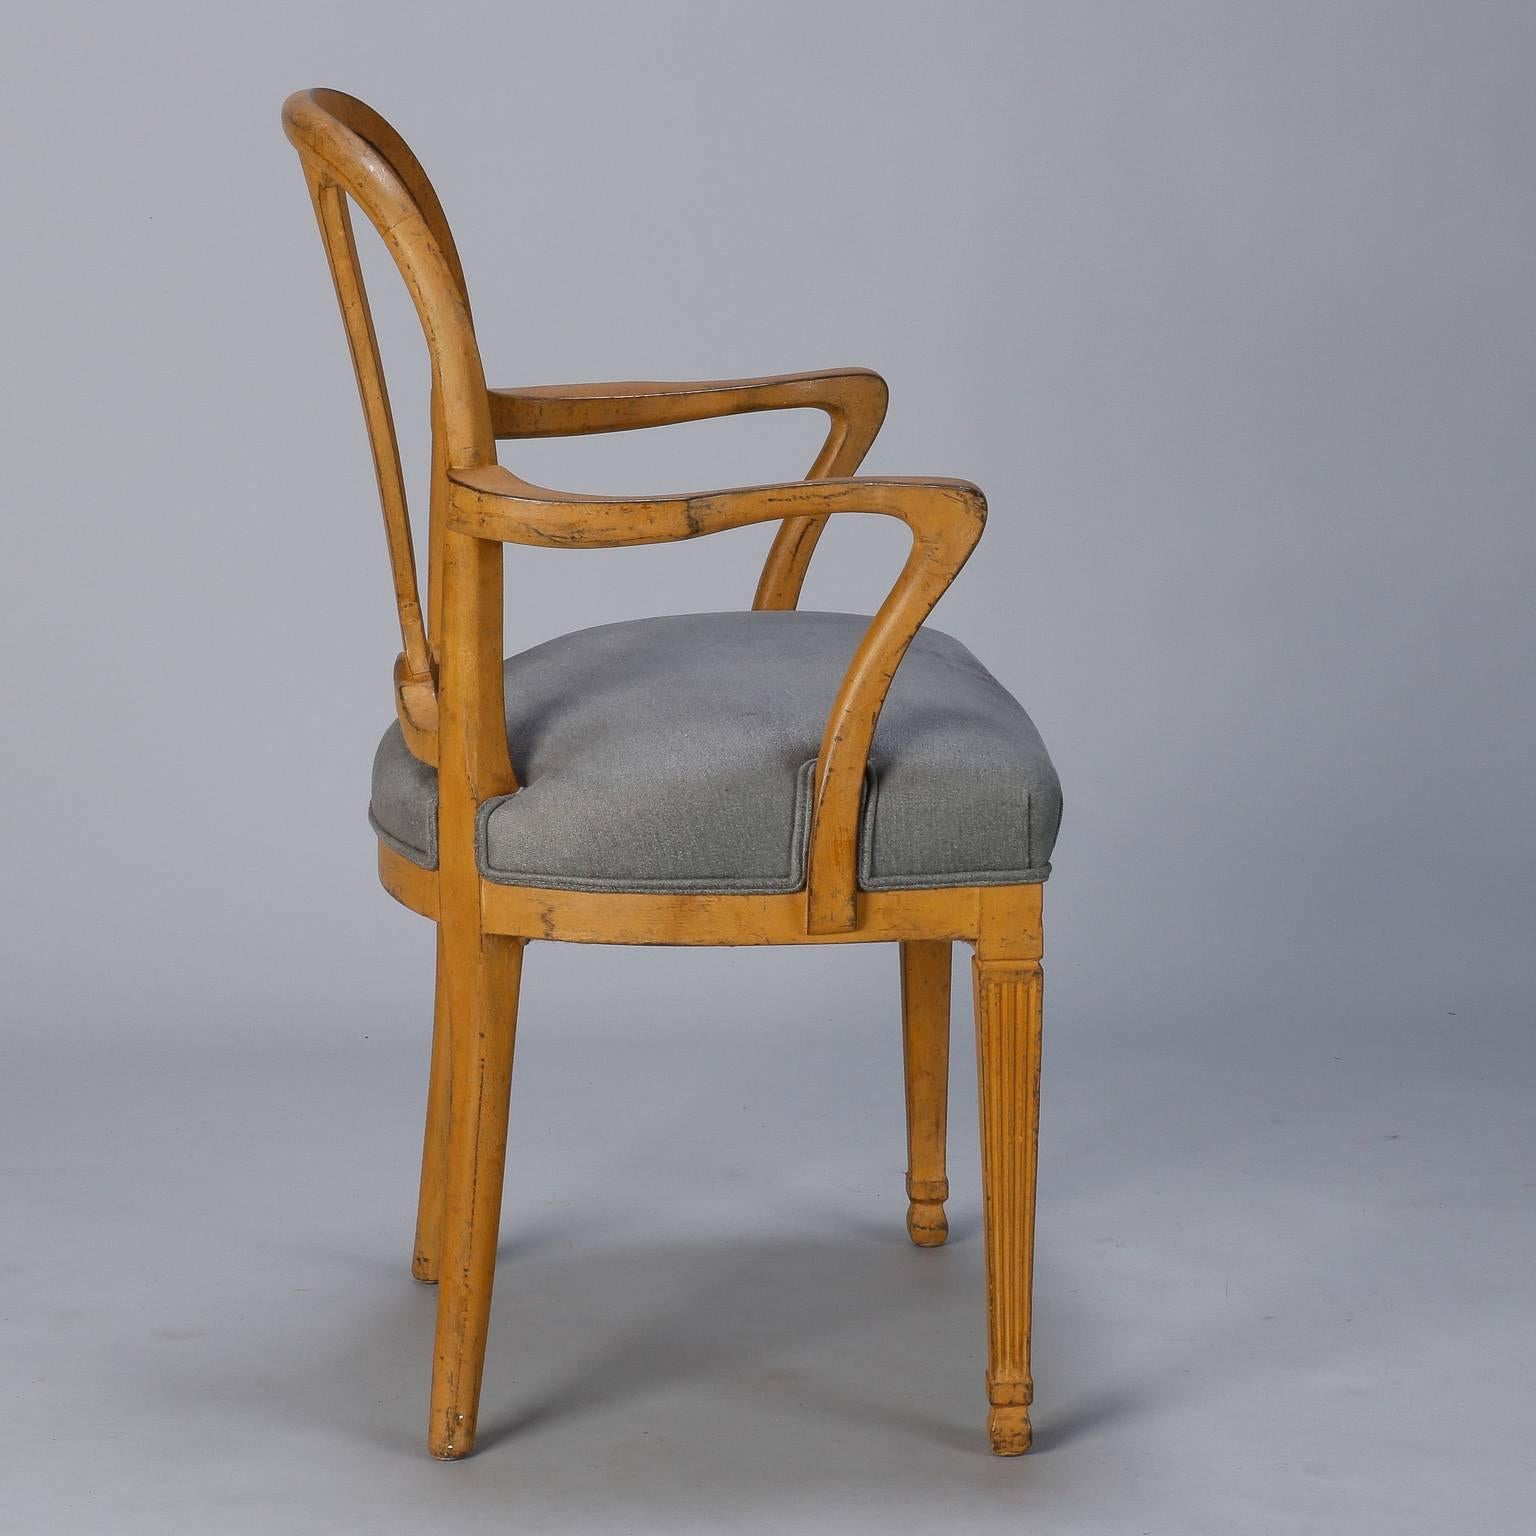 Circa 1920s French arm chair has rounded back rest with flared, urn shaped splat and curved arms. Reeded front legs, and flared back legs. Muted rusty orange brown painted and distressed finish with newly upholstered seat in blue gray fabric. Arms